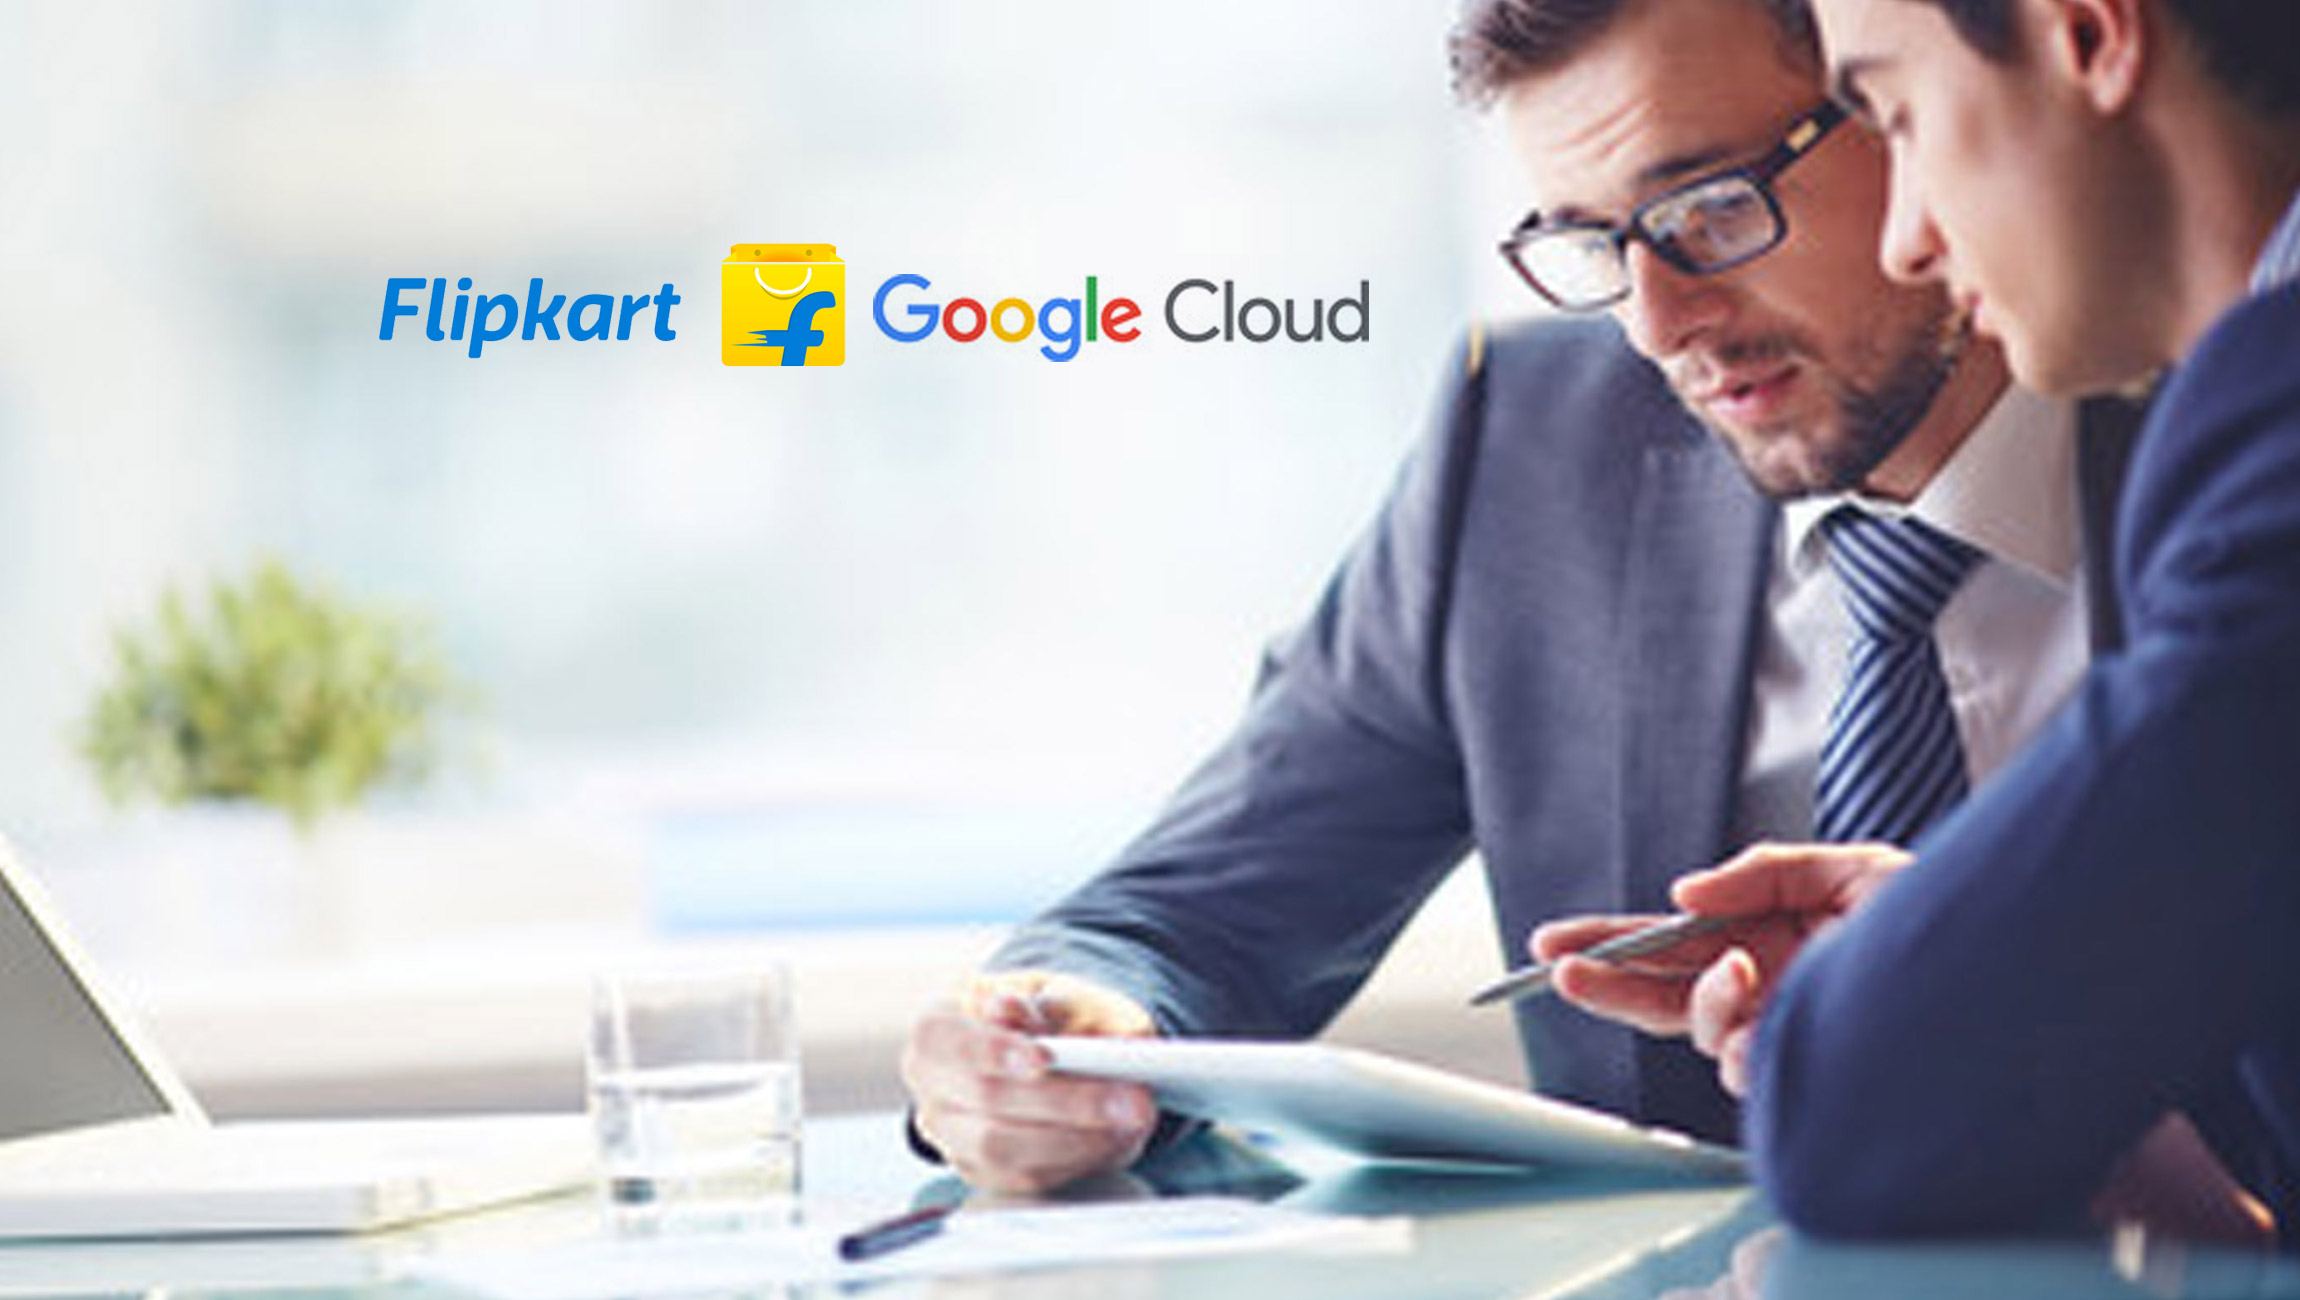 Flipkart Enters Strategic Alliance with Google Cloud to Advance Innovation in a Digital-first Future